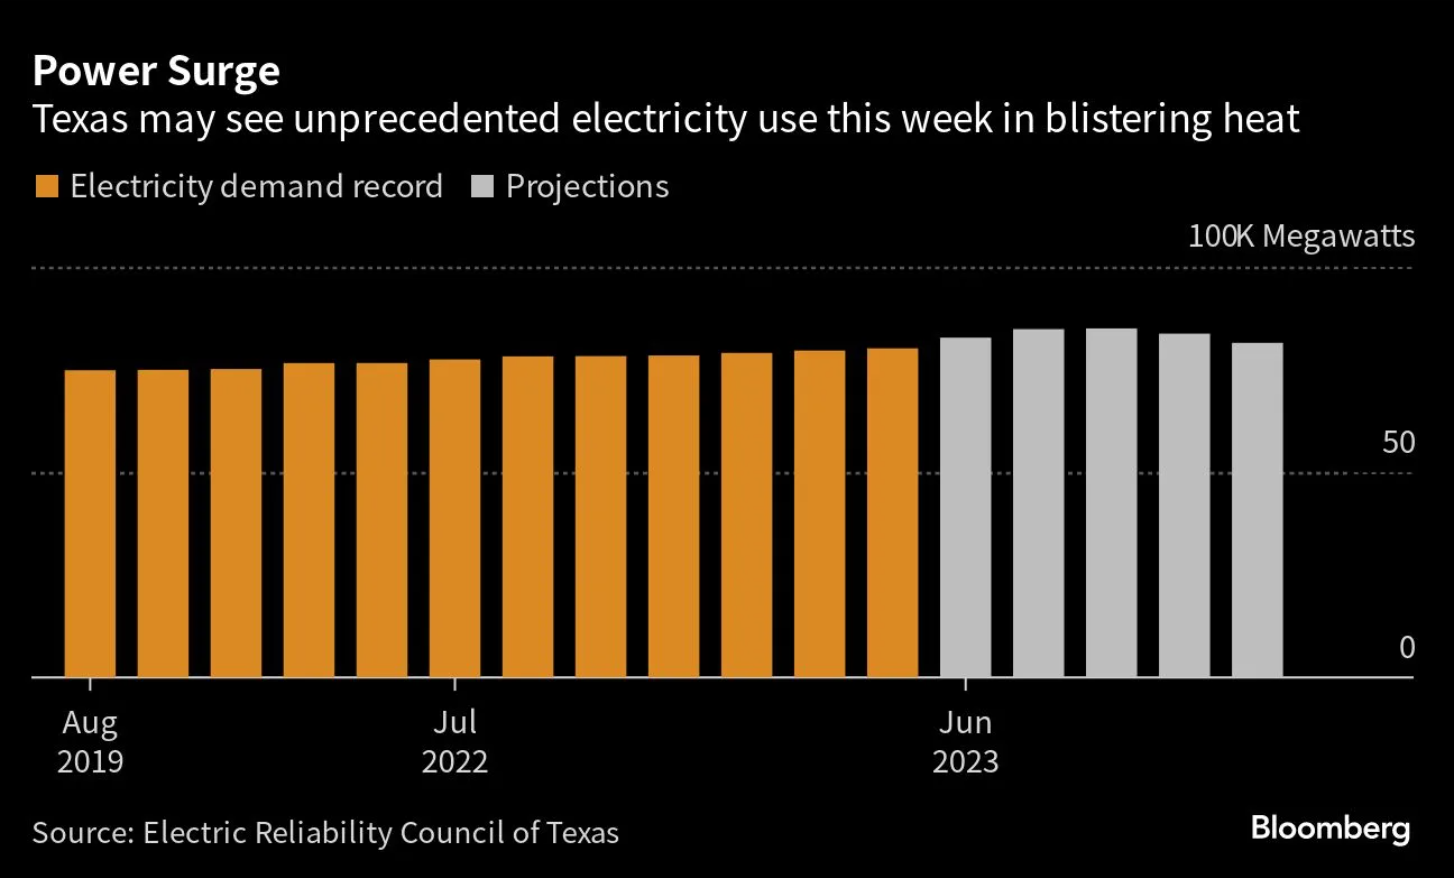 On 27 June 2023, Texas once again braced for a record spike in electricity demand as 110F heat spurred air-conditioning usage. An early heat wave gripped the second most-populous US state, buckling highways, stressing oil refineries and pushing up natural gas prices. At least two deaths were attributed to the searing temperatures and it was only expected to get hotter as the week wears on. It was not a new problem for Texas: The Lone Star State broke power-demand records 11 times in the summer of 2022. Graphic: Bloomberg